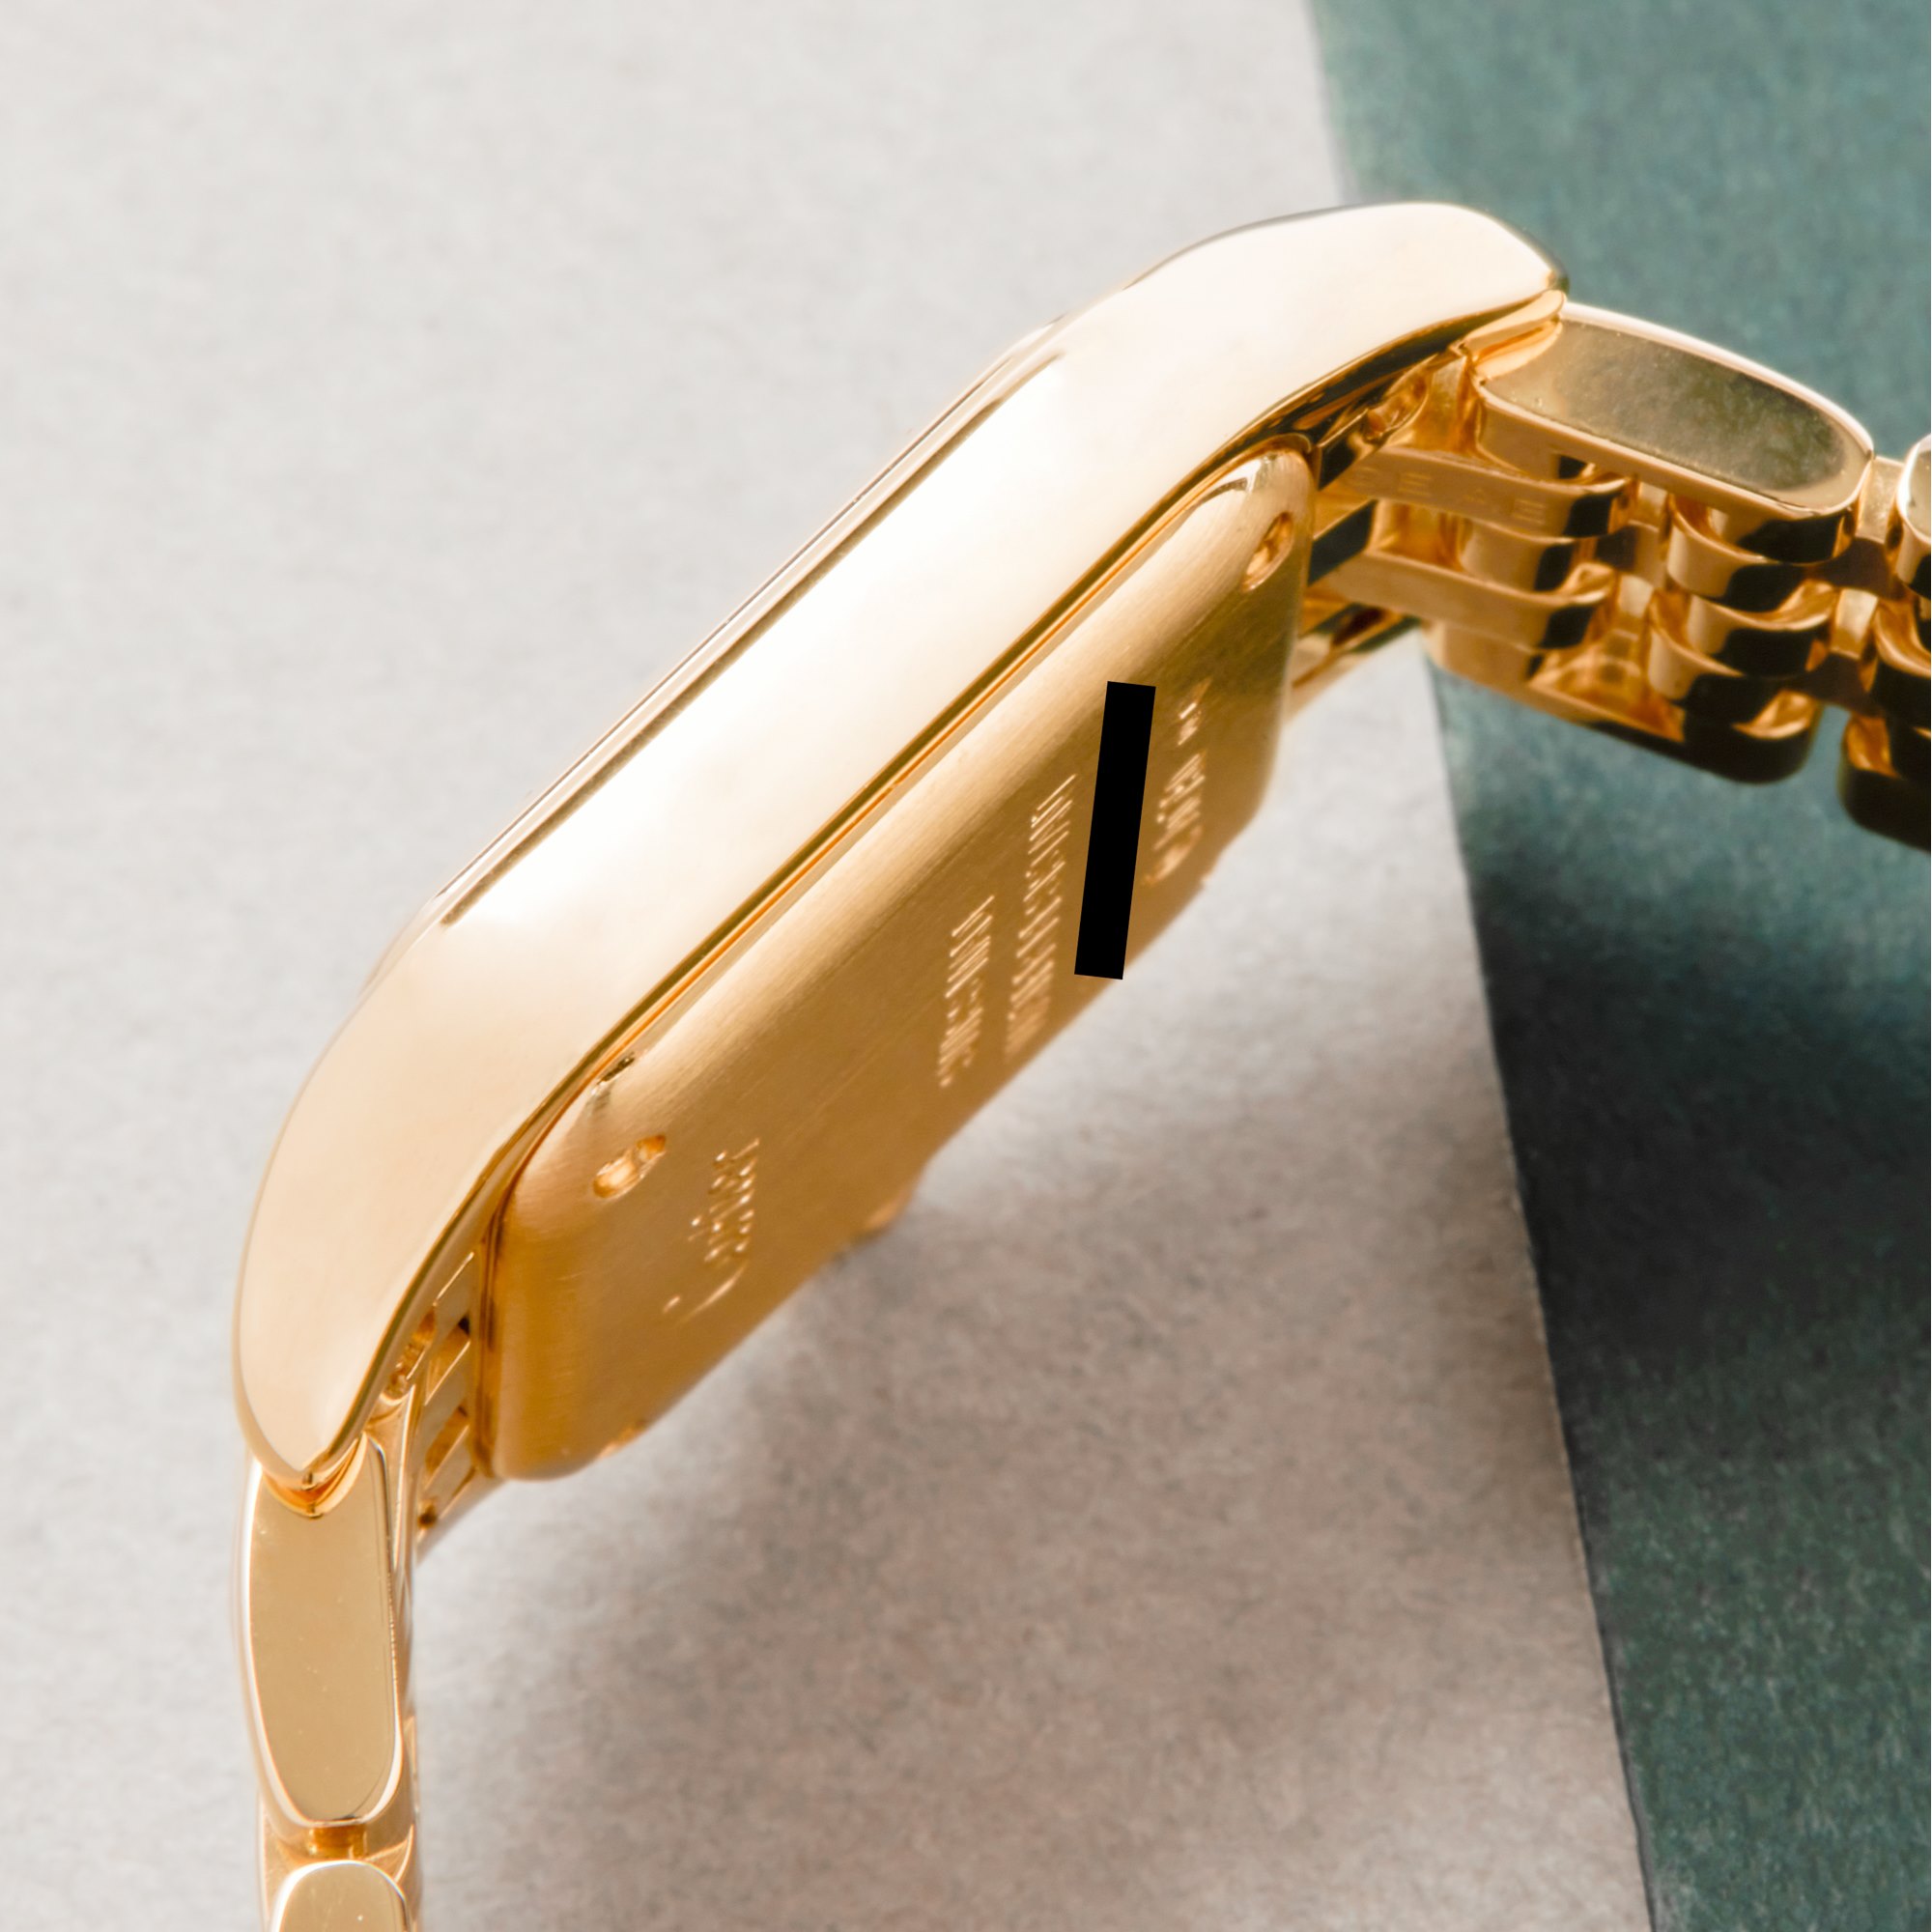 Cartier Panthère Yellow Gold WGPN0008 or 4178